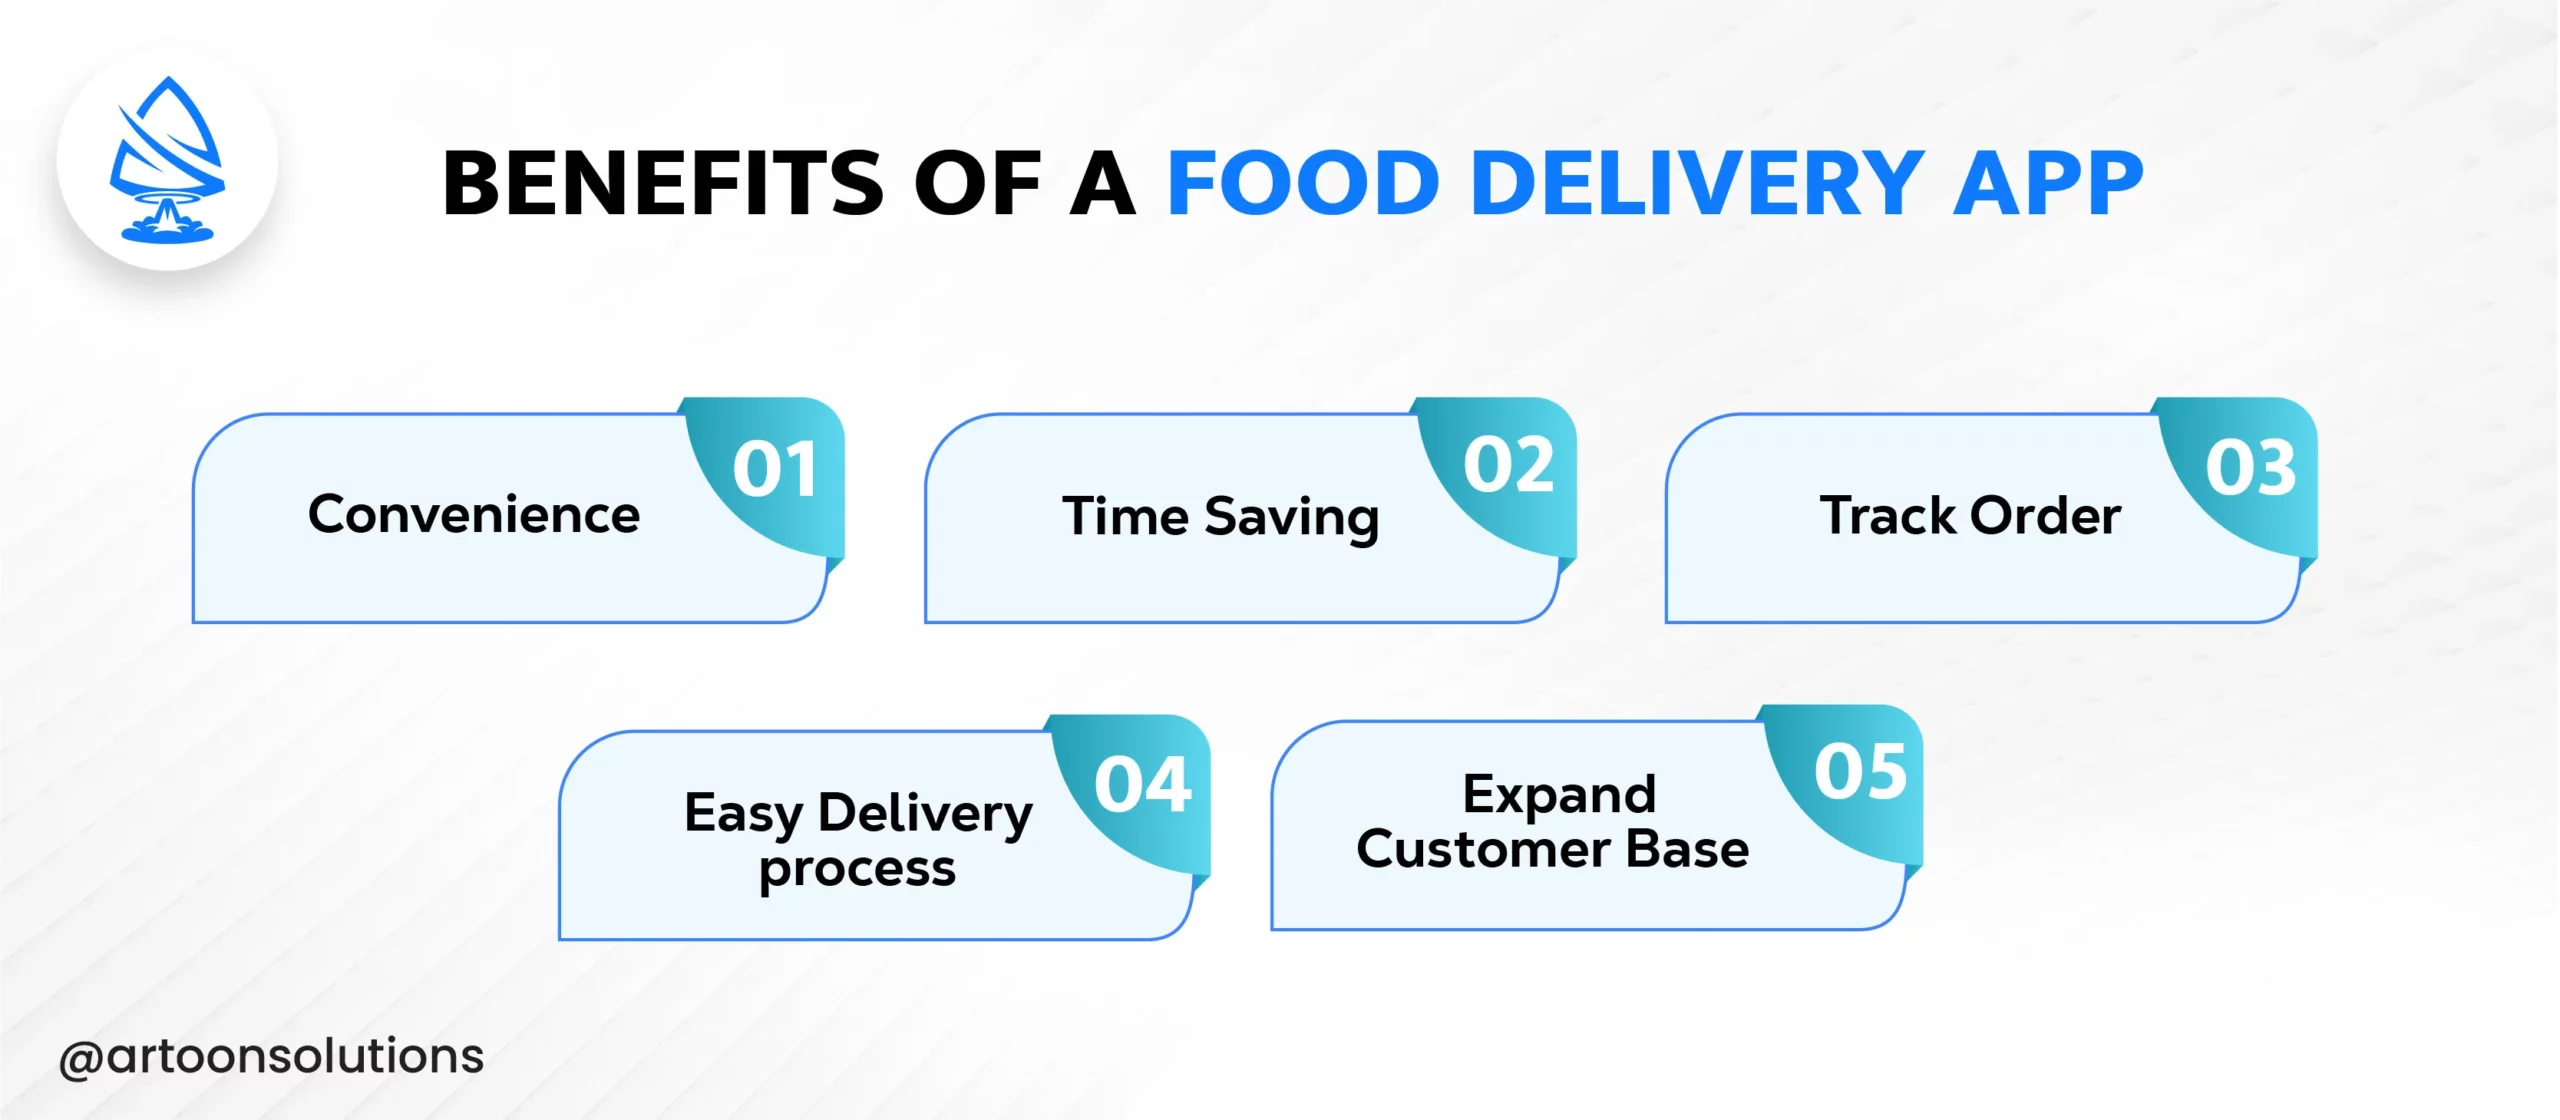 Benefits of a Food Delivery App